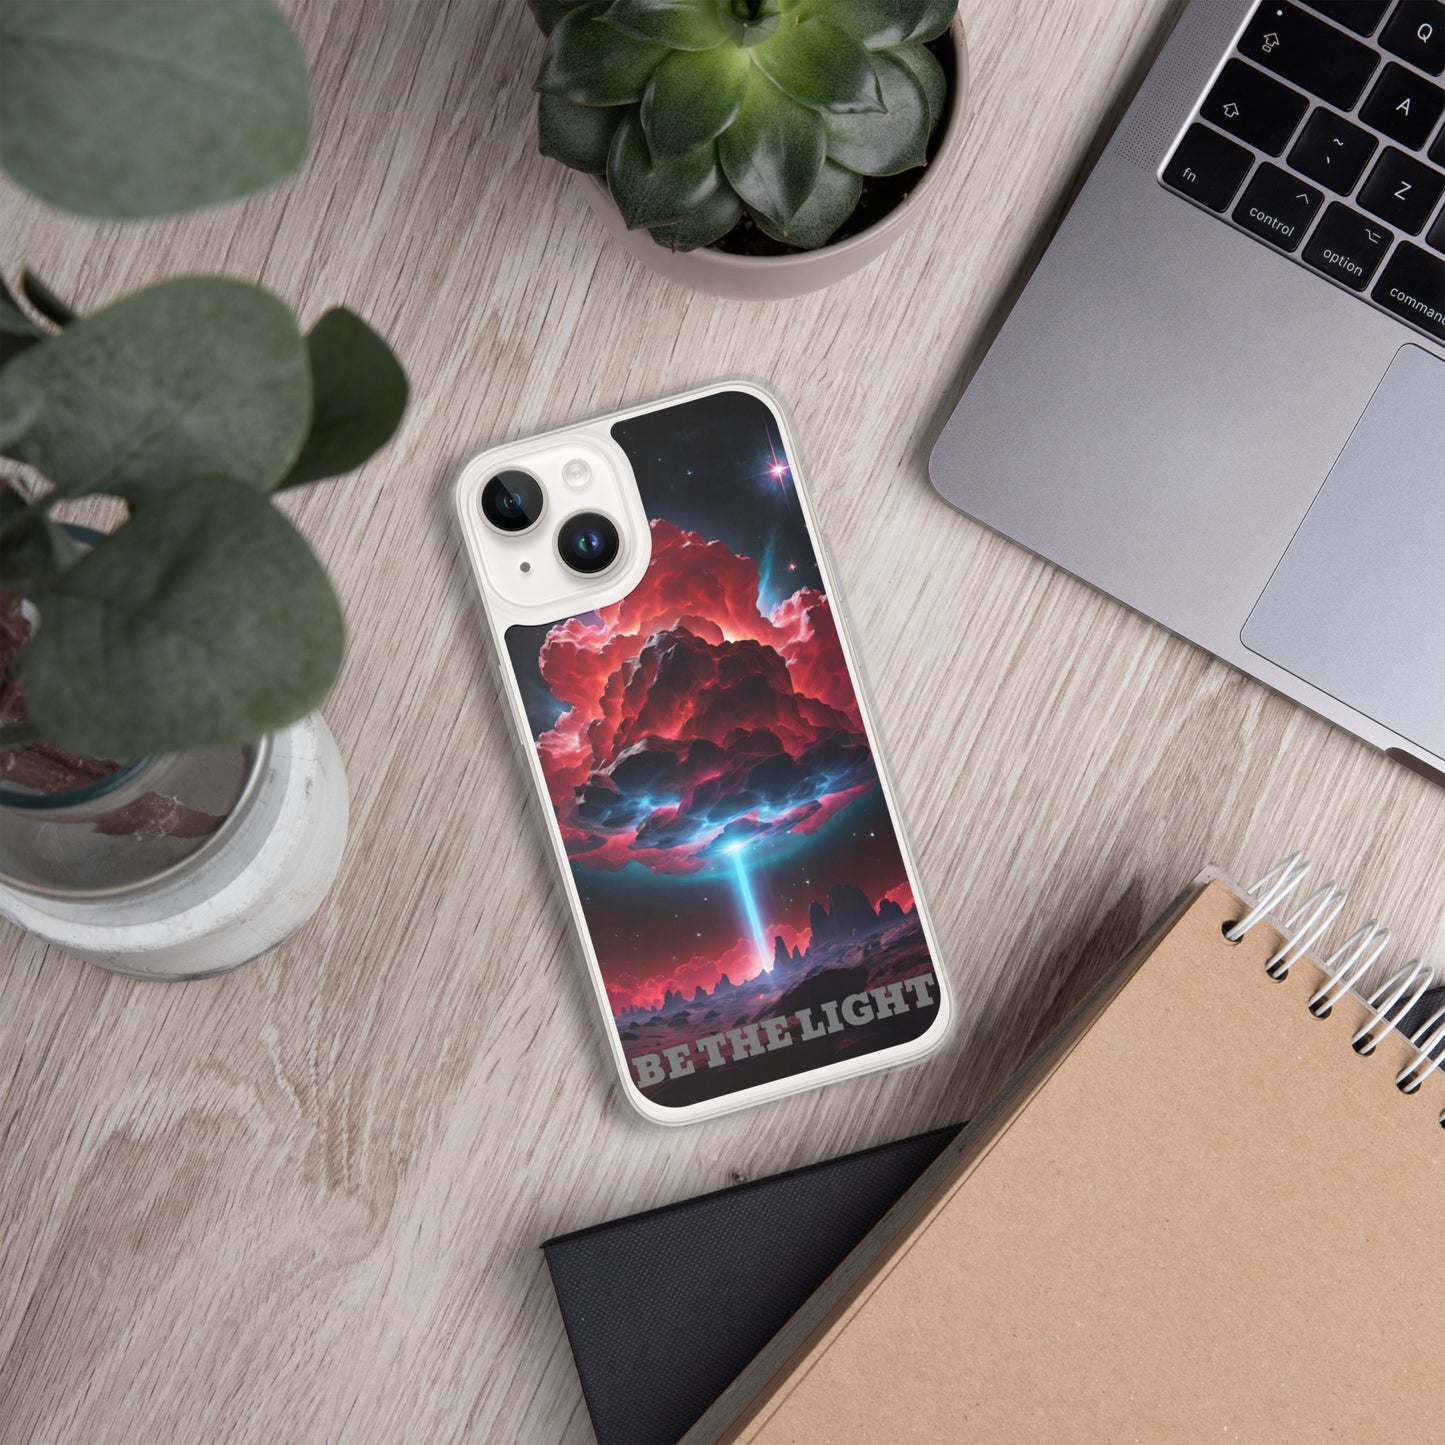 iPhone® Case: Be The Light